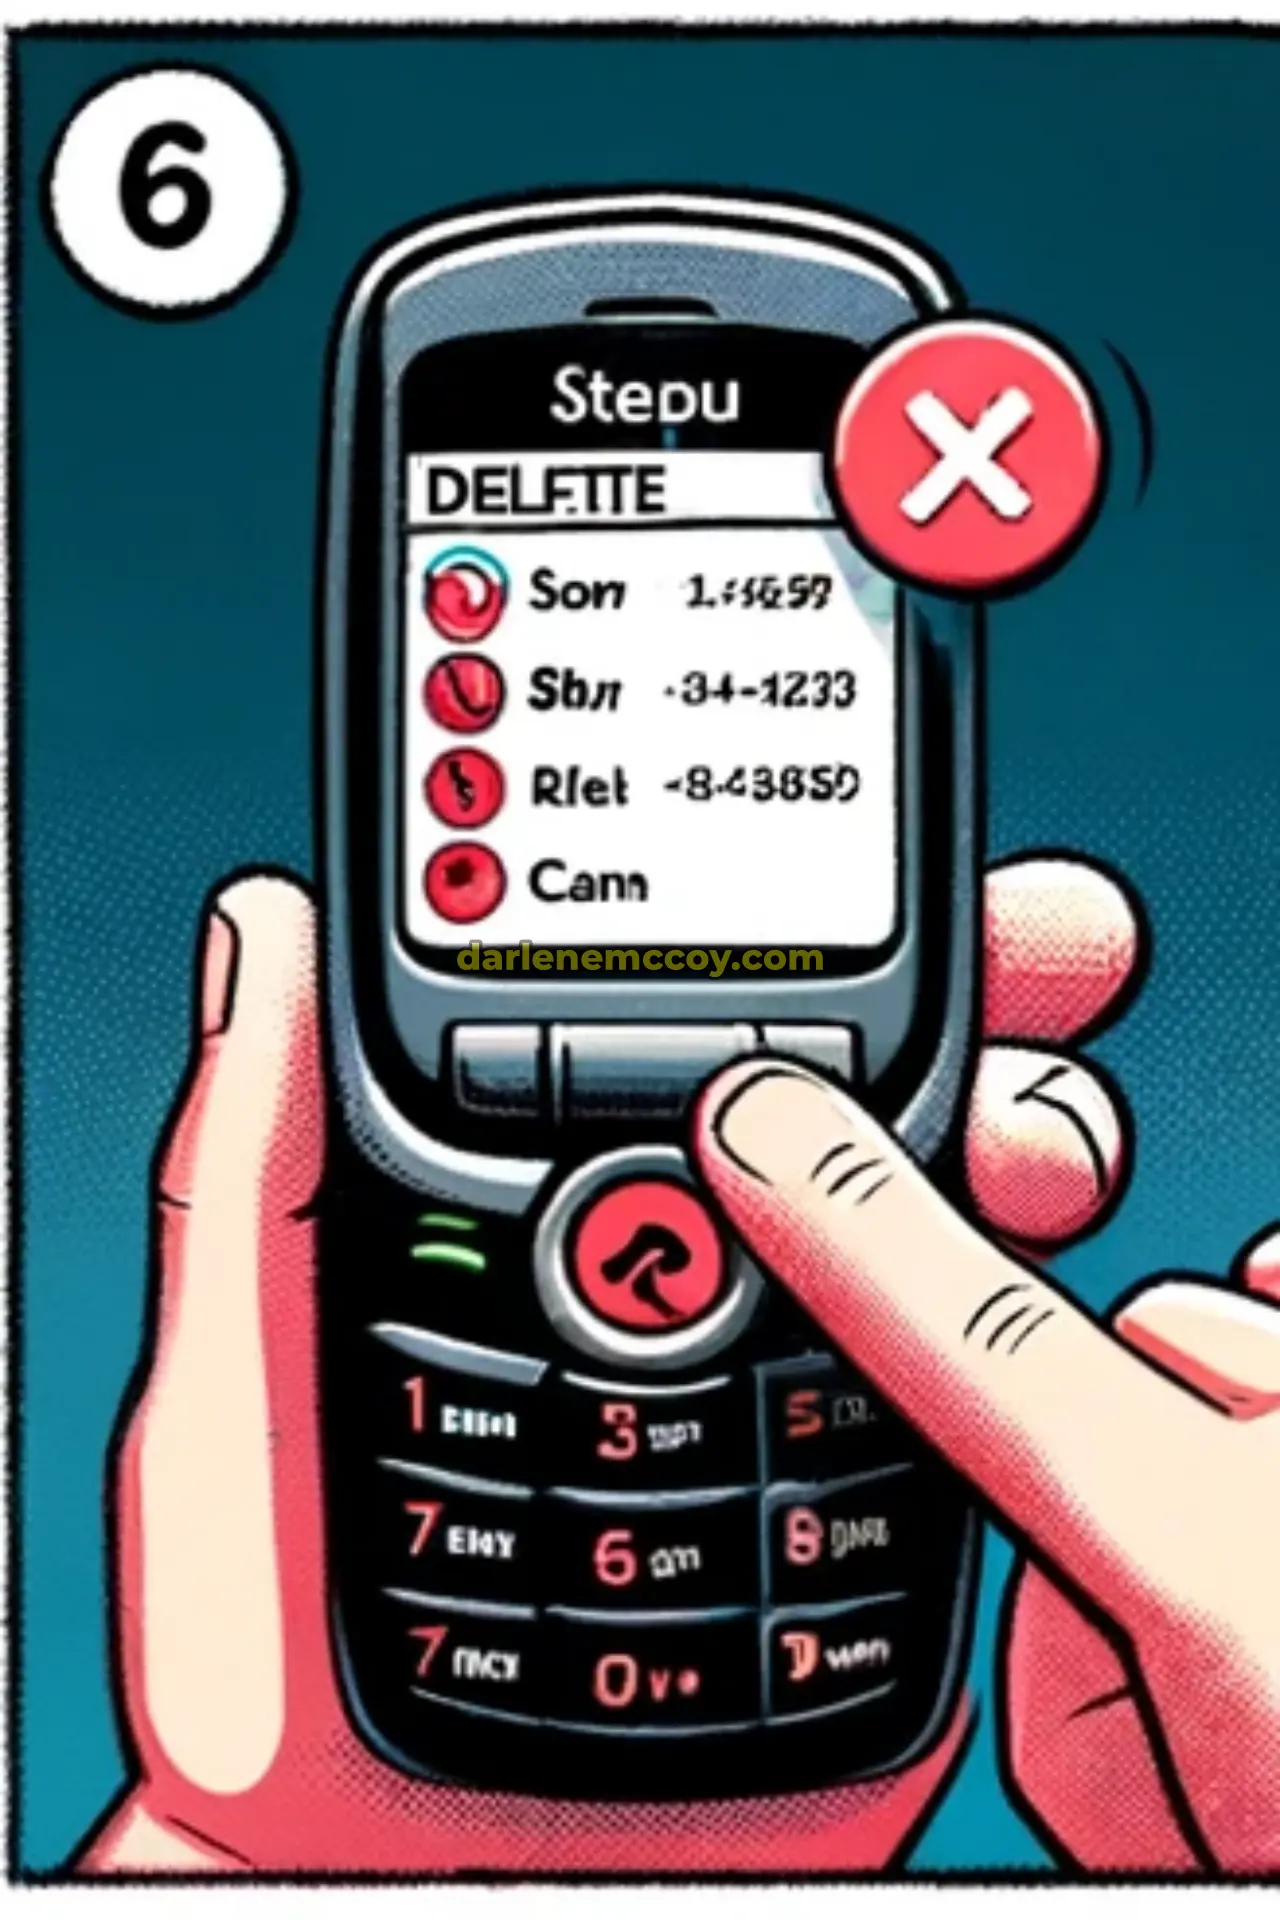 How to Delete Missed Calls on Jitterbug Flip Phone